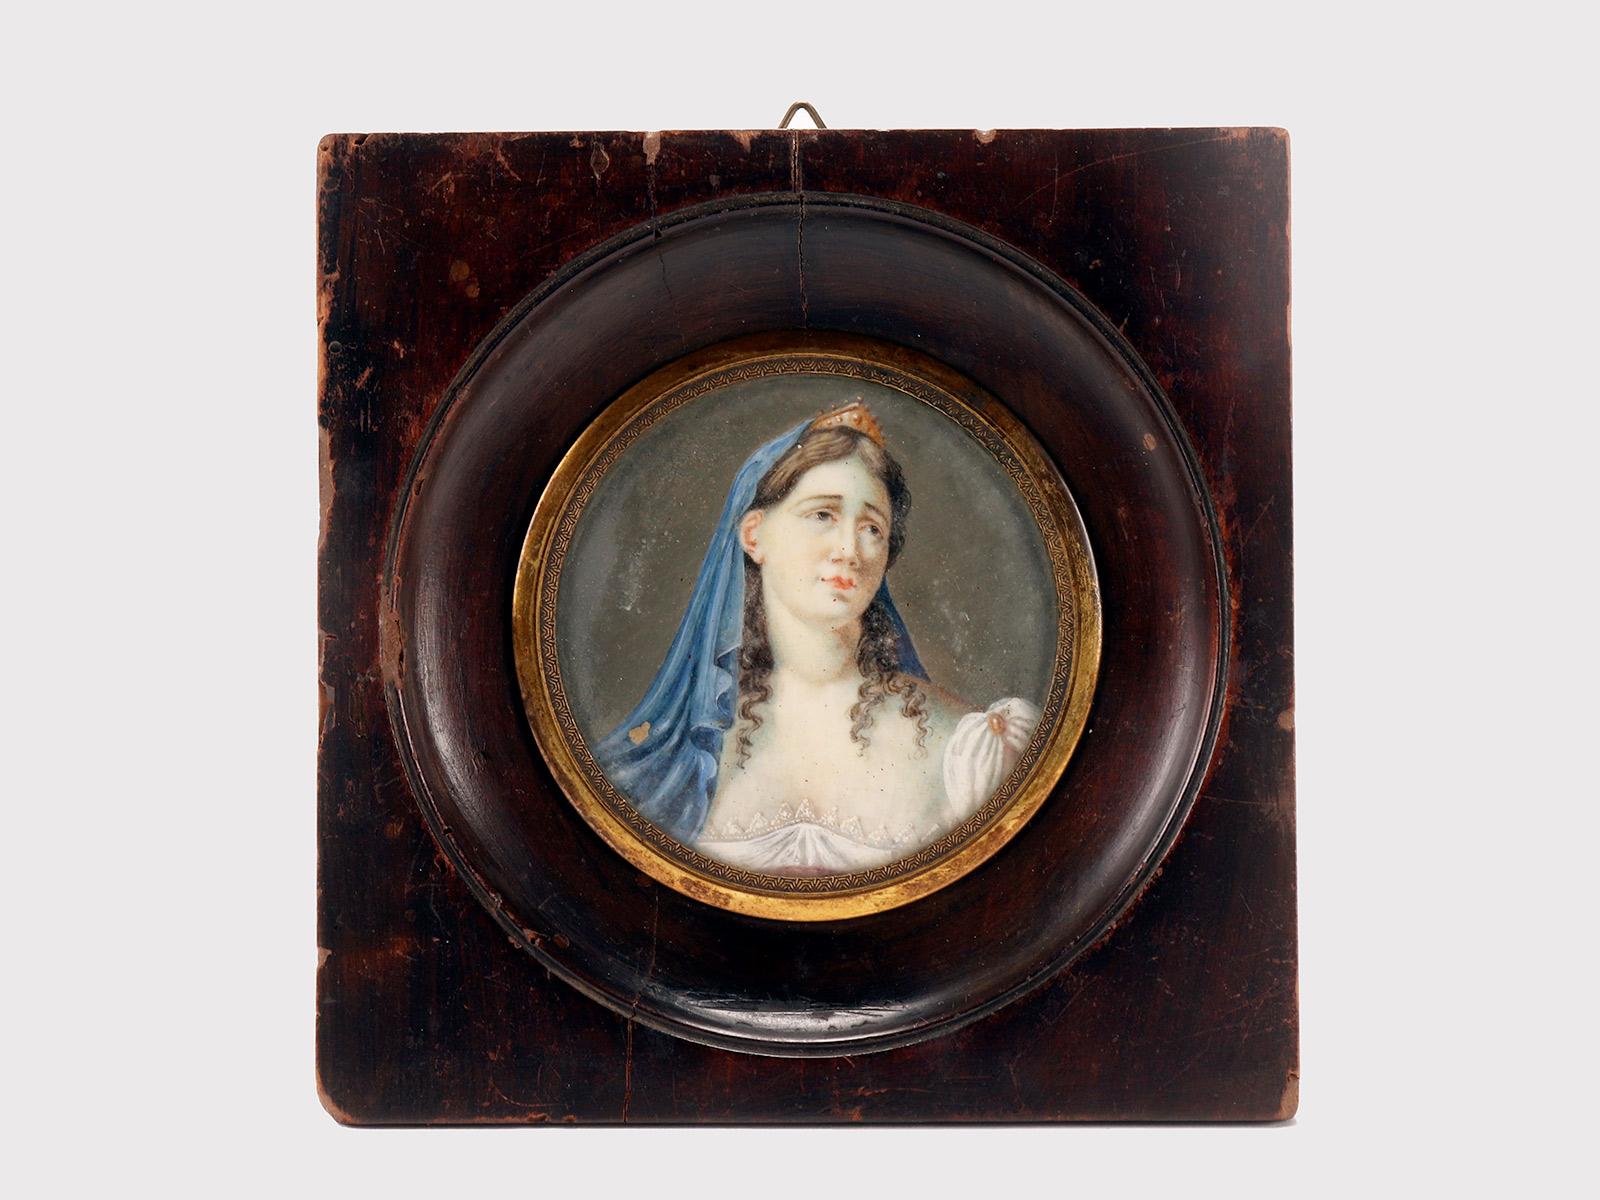 Miniature with female subject, watercolor on ivory.
The frame, in waxed fruit wood, is square in shape with a circle inside. The circle is bordered by a gilt brass decoration which fixes the glass.
The miniature represents a female figure with a